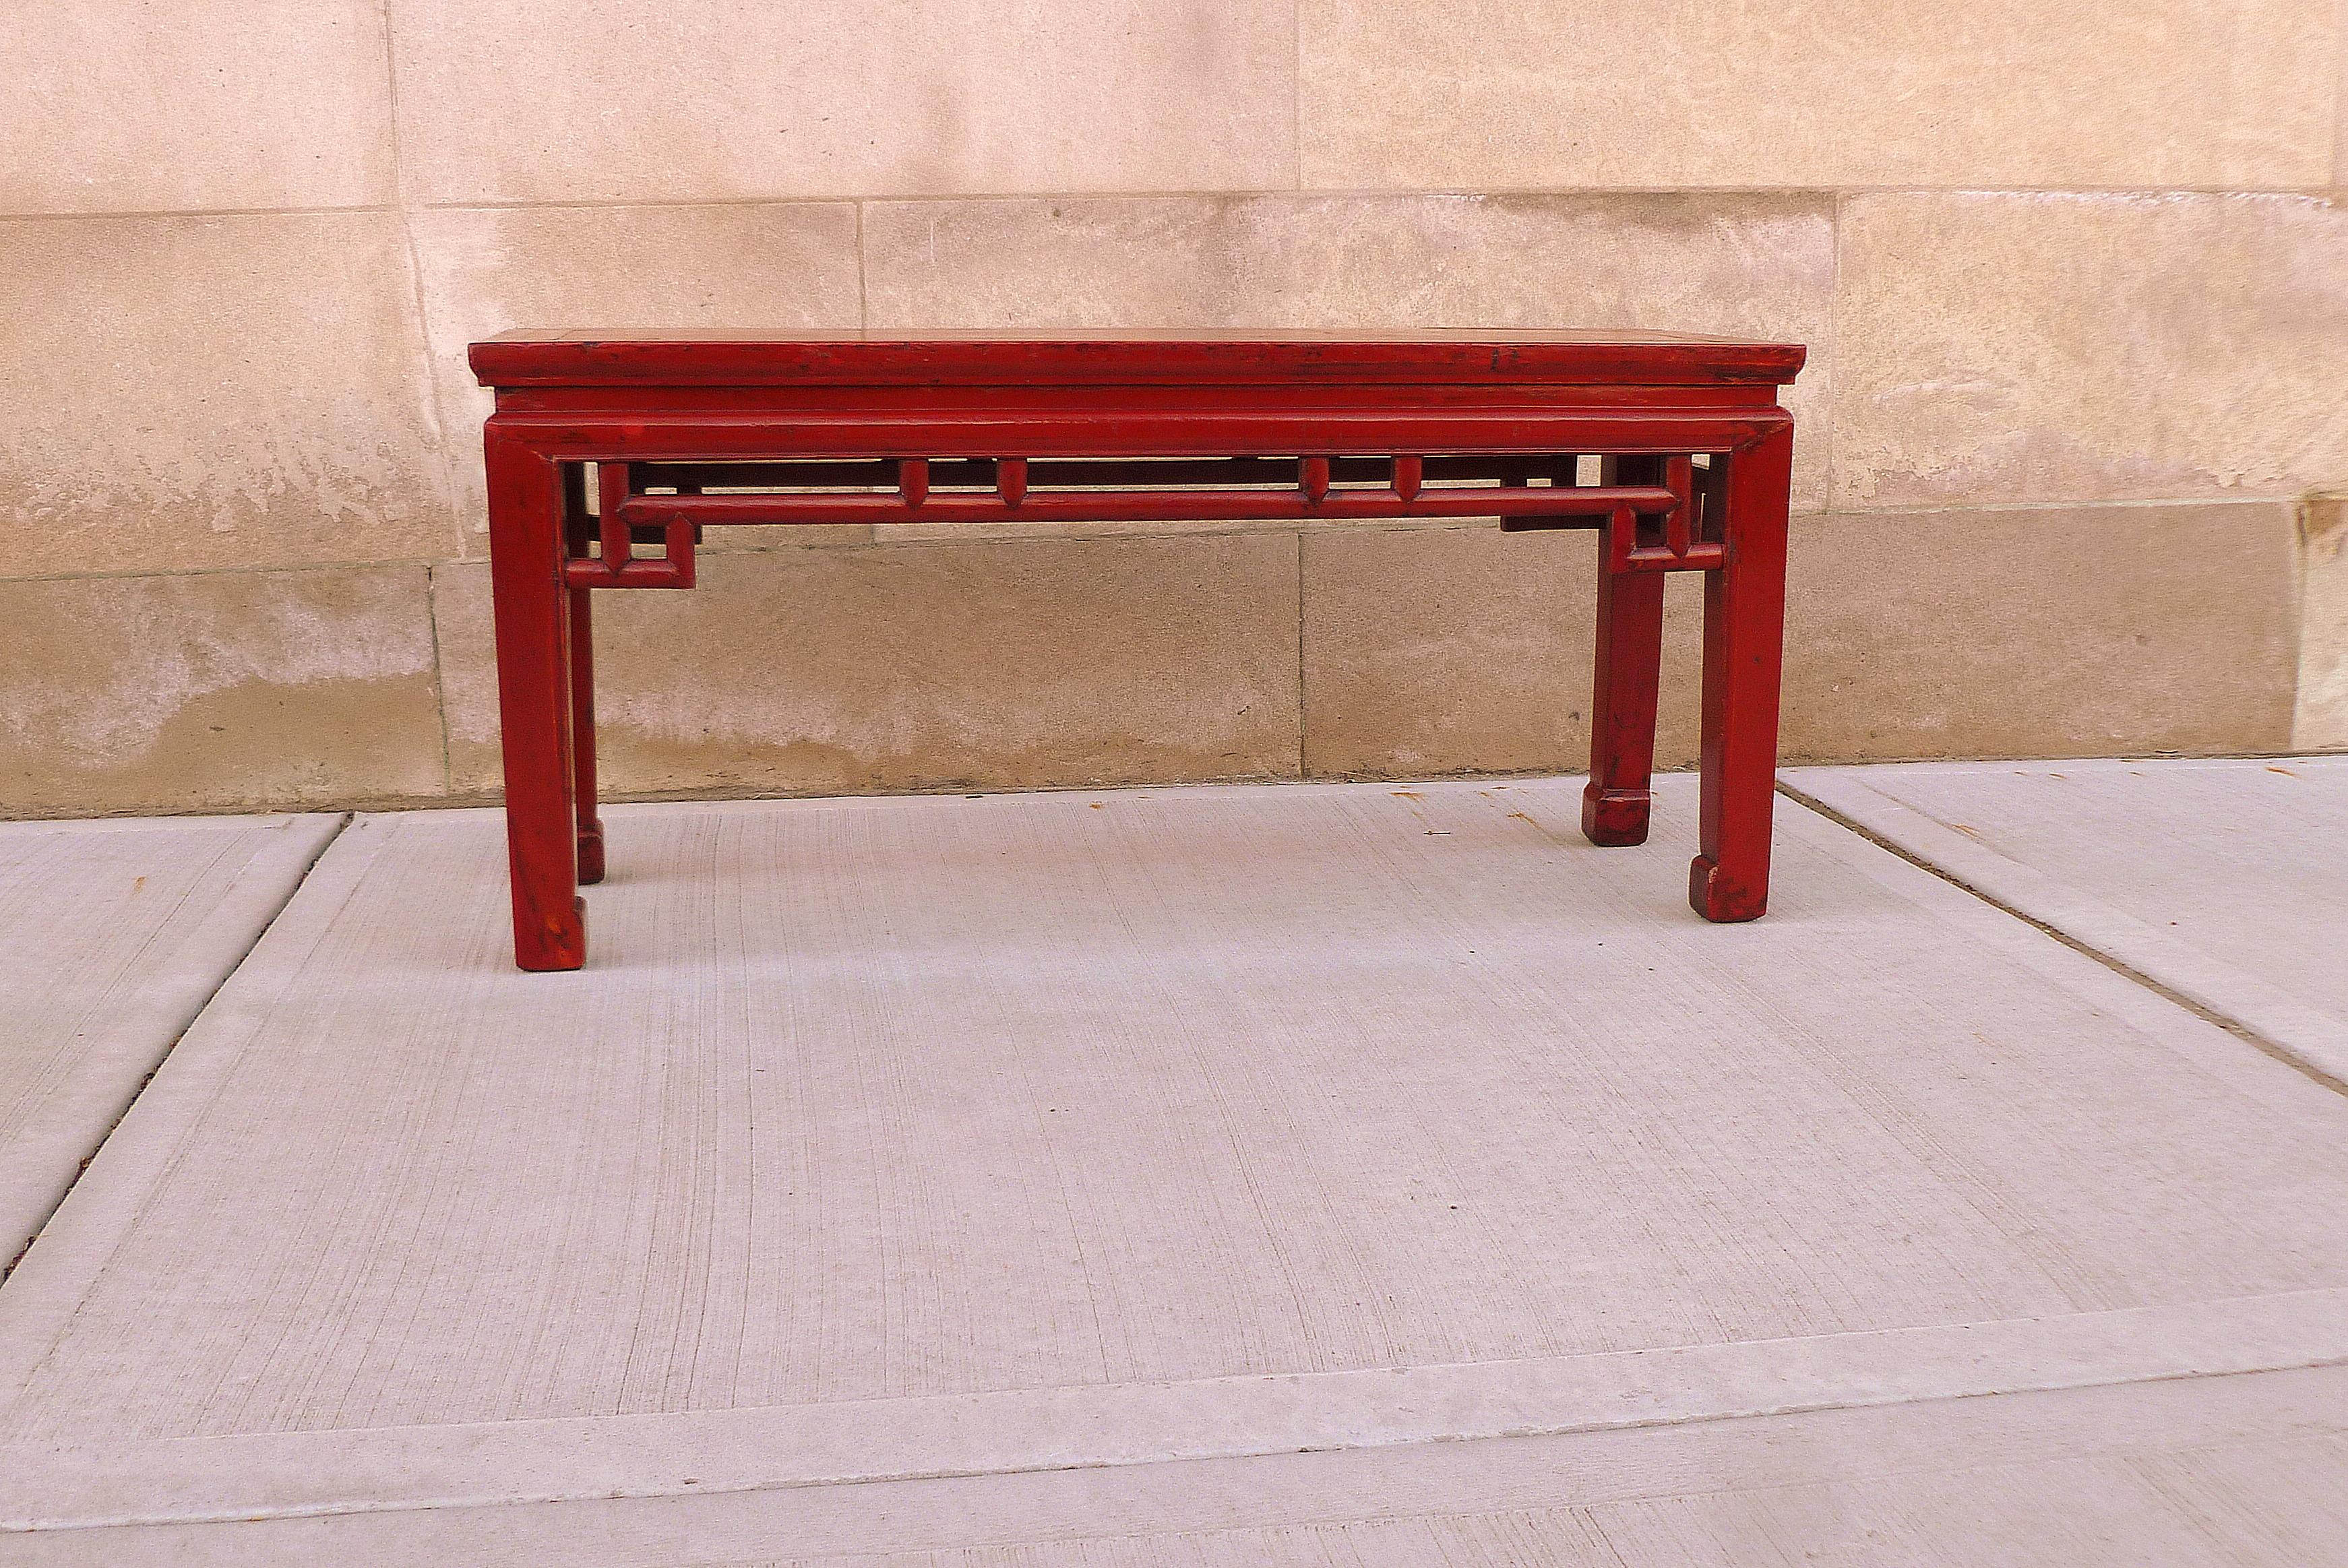 Polished Red Lacquer Bench